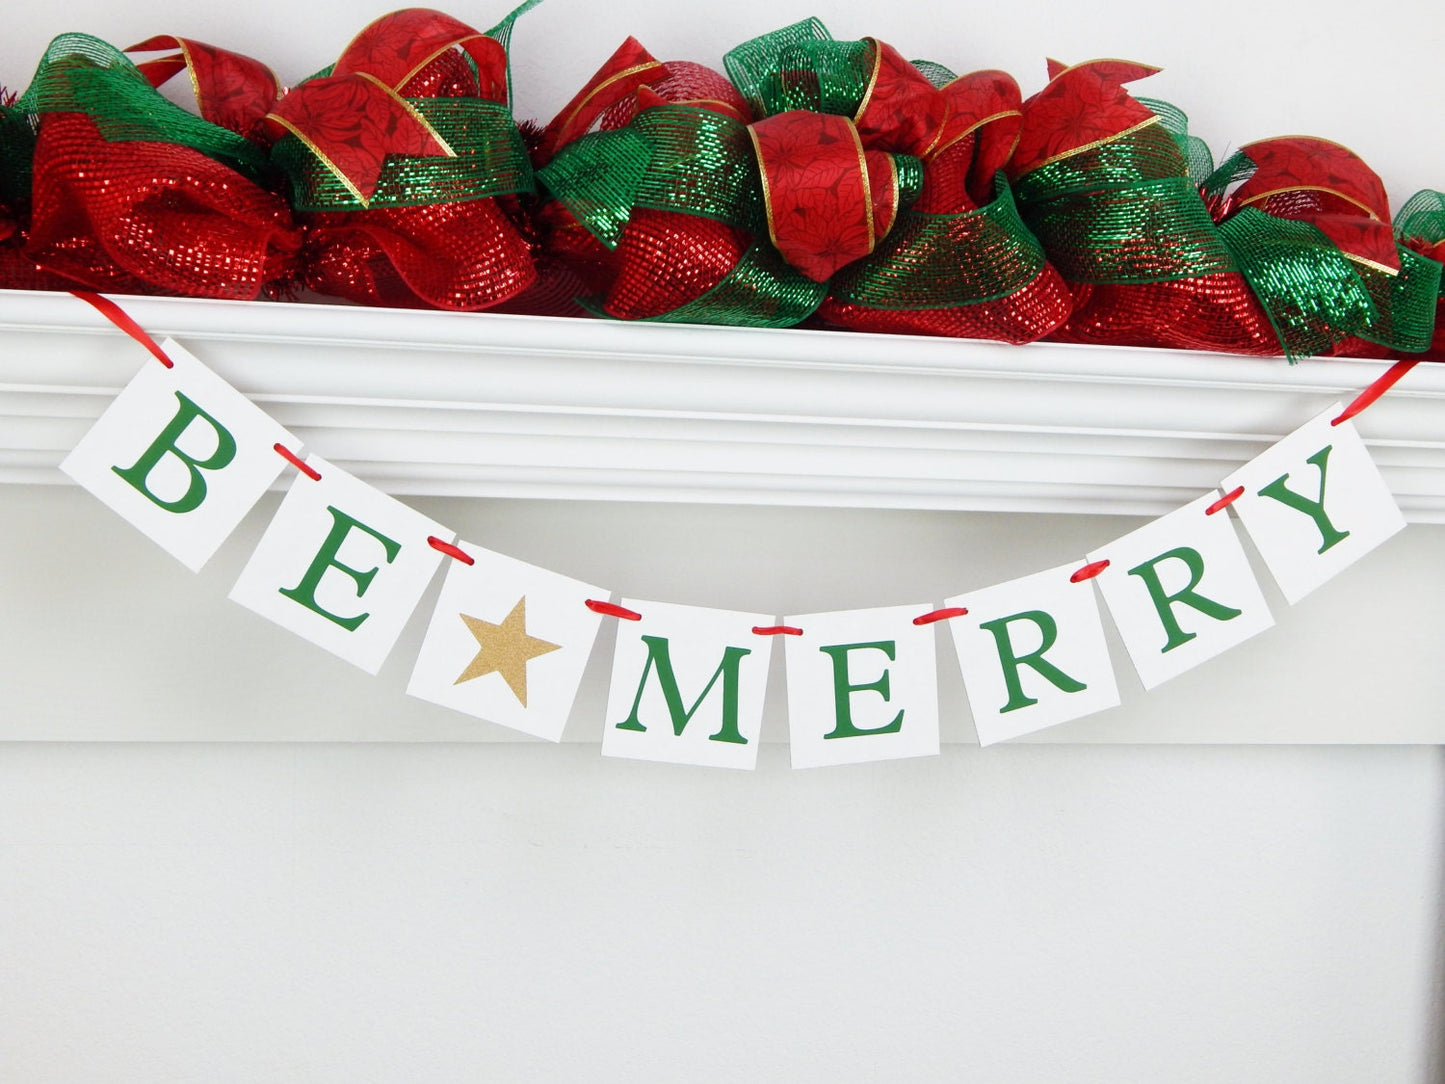 Be Merry Banner, holiday banner, cheerful holiday garland, Christmas decor, fireplace mantel decor, merry christmas banner